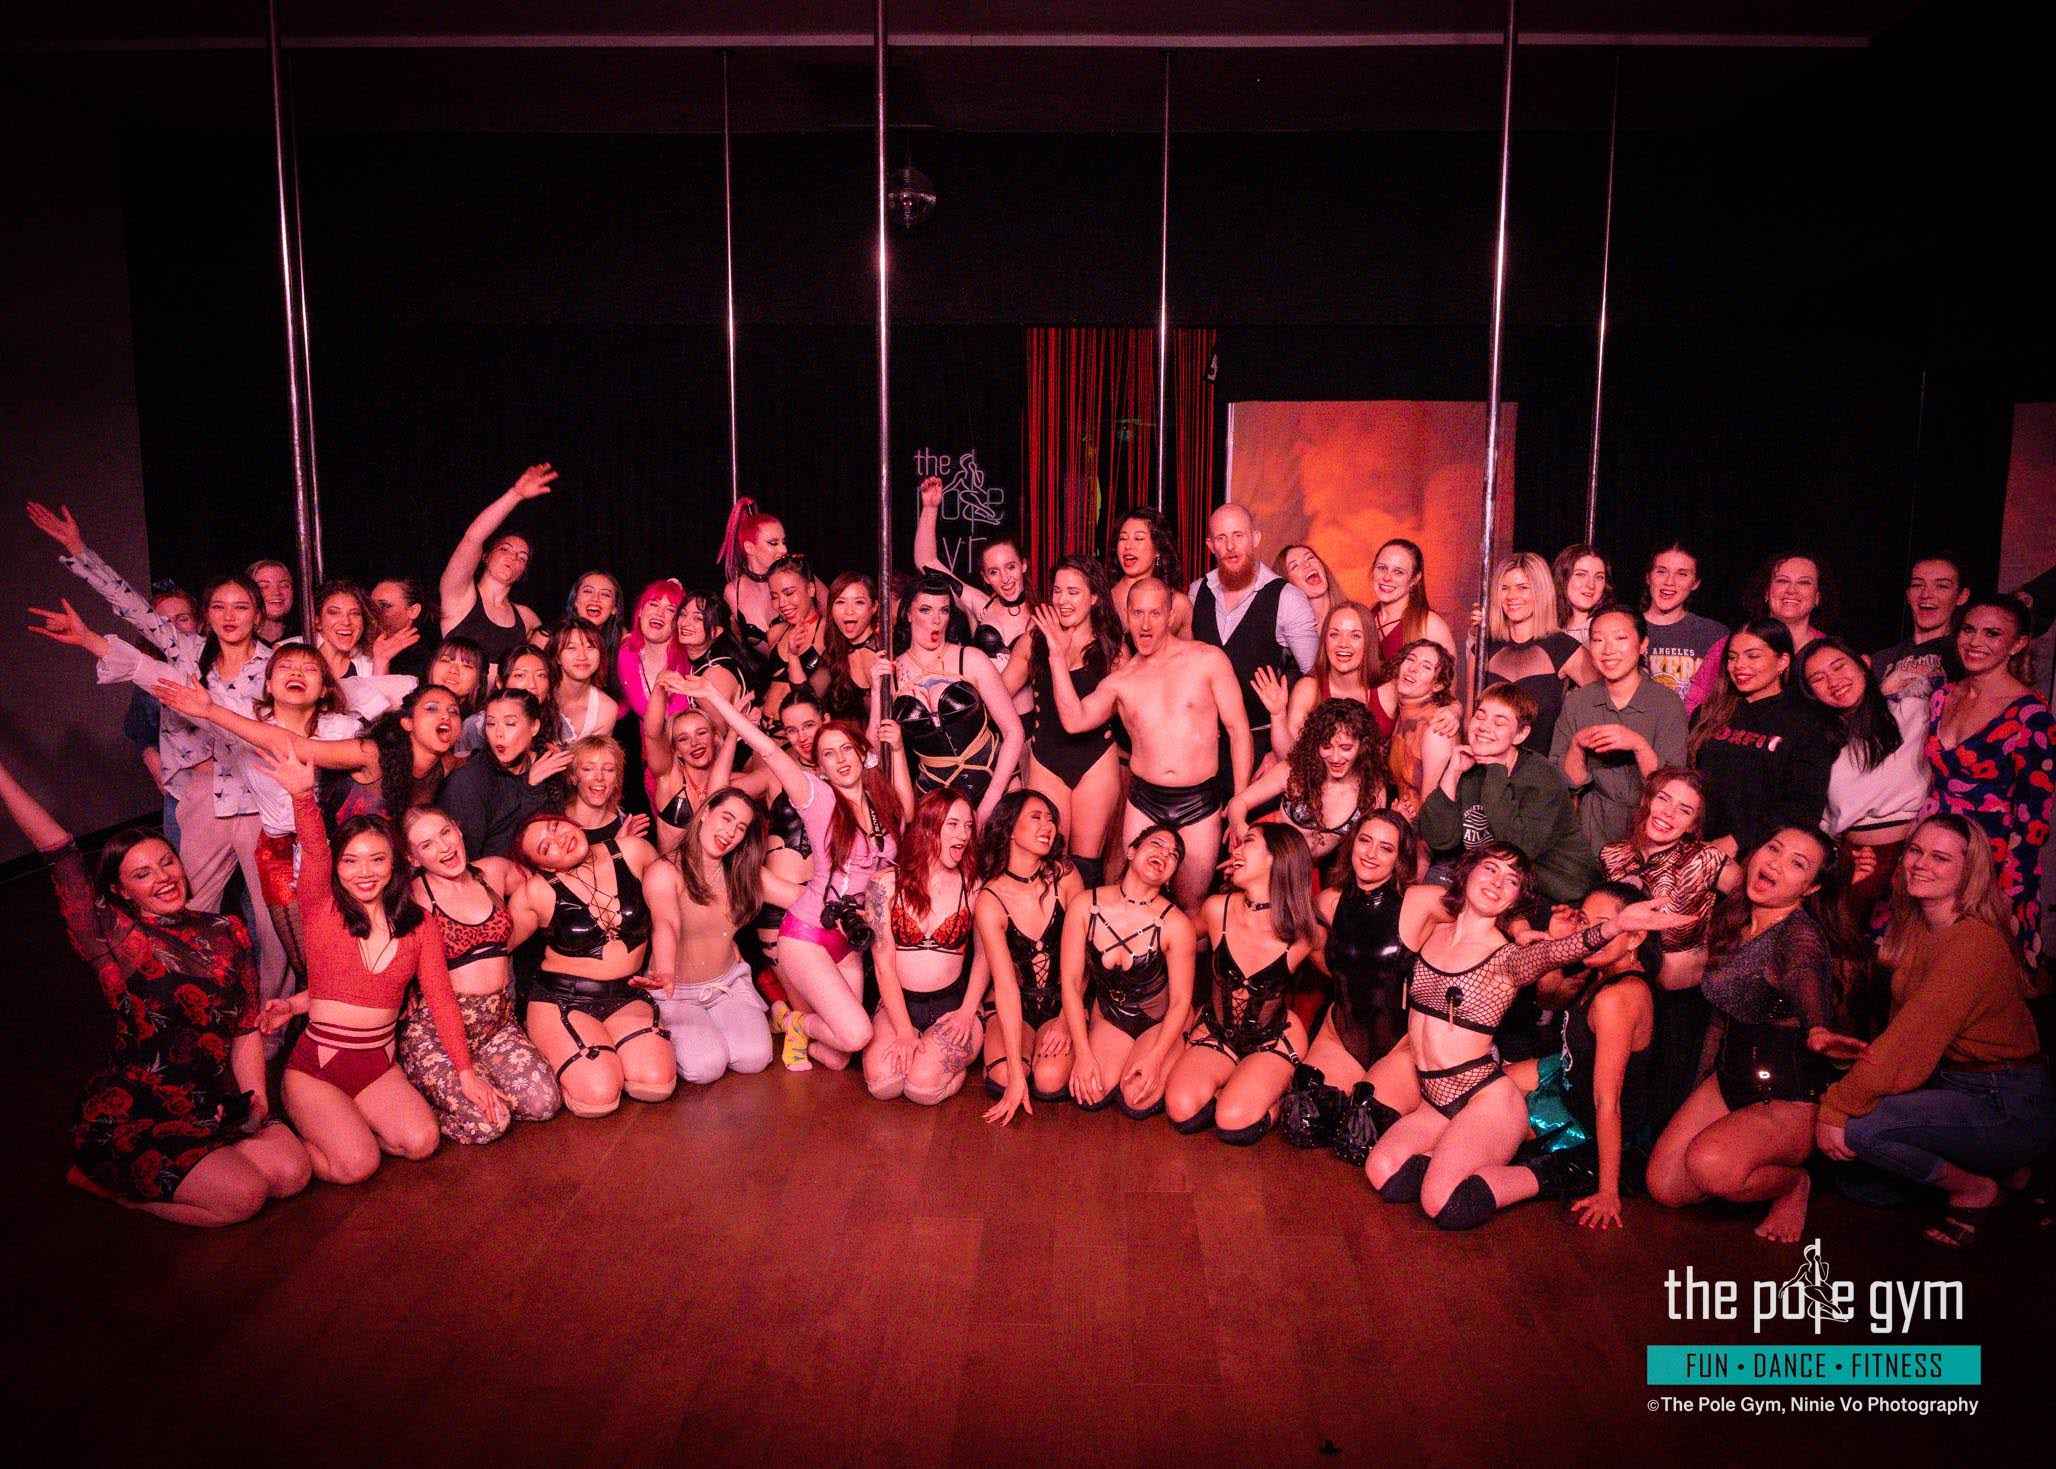 Fun and silly photo from the students who performed at the LUST Performance Night! Everyone had such a fun time pole dancing together!